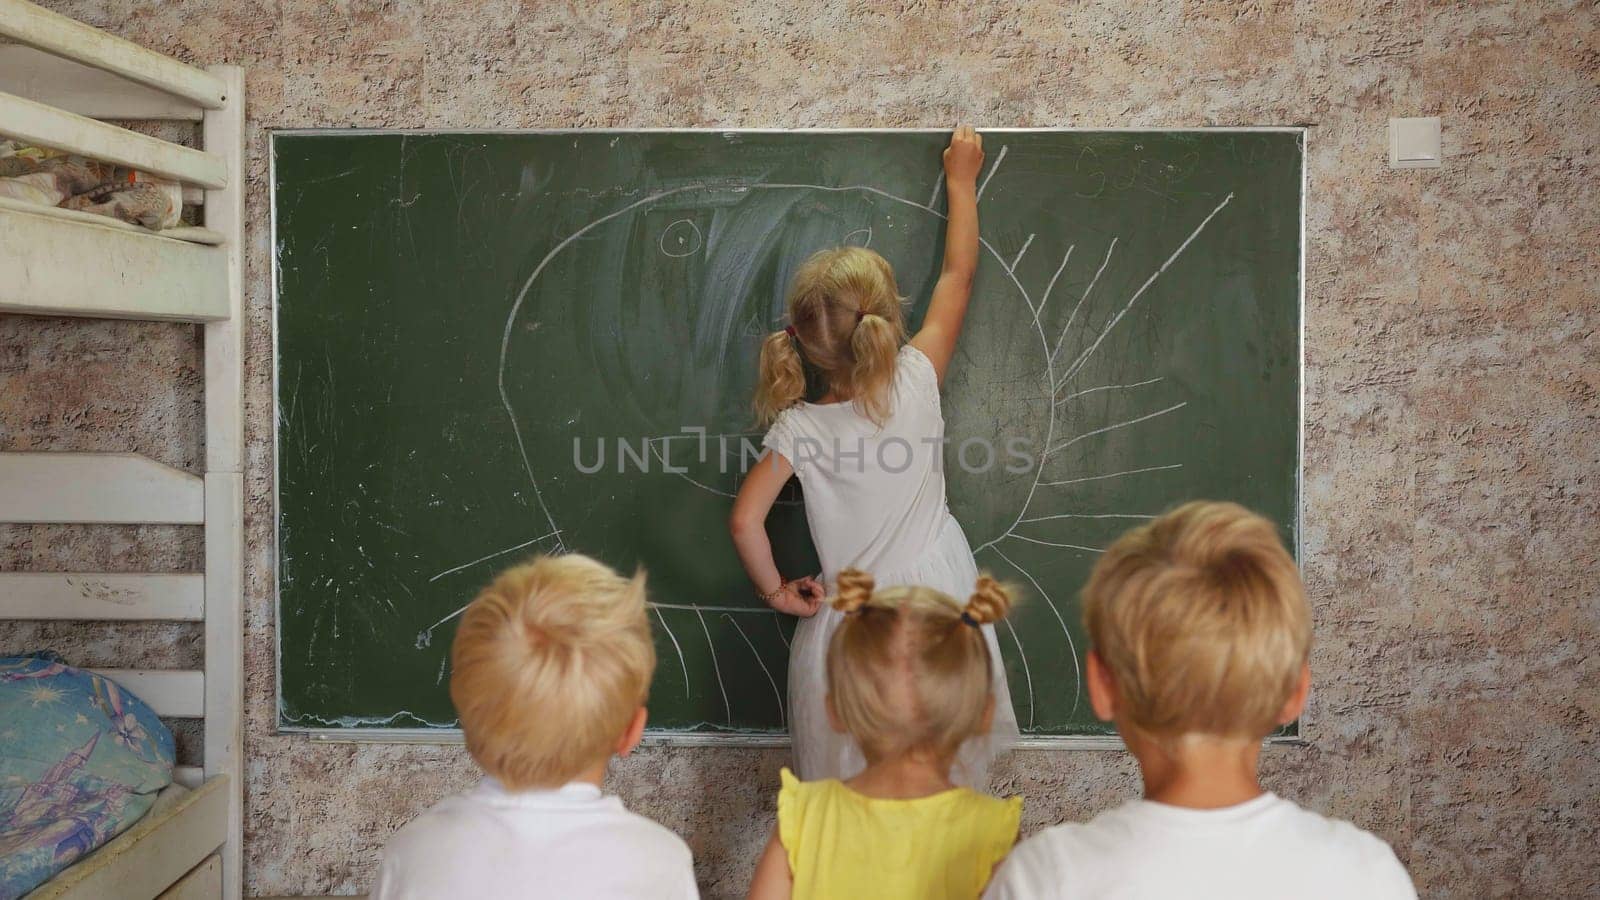 A six year old girl draws on a board in front of her sisters and brothers